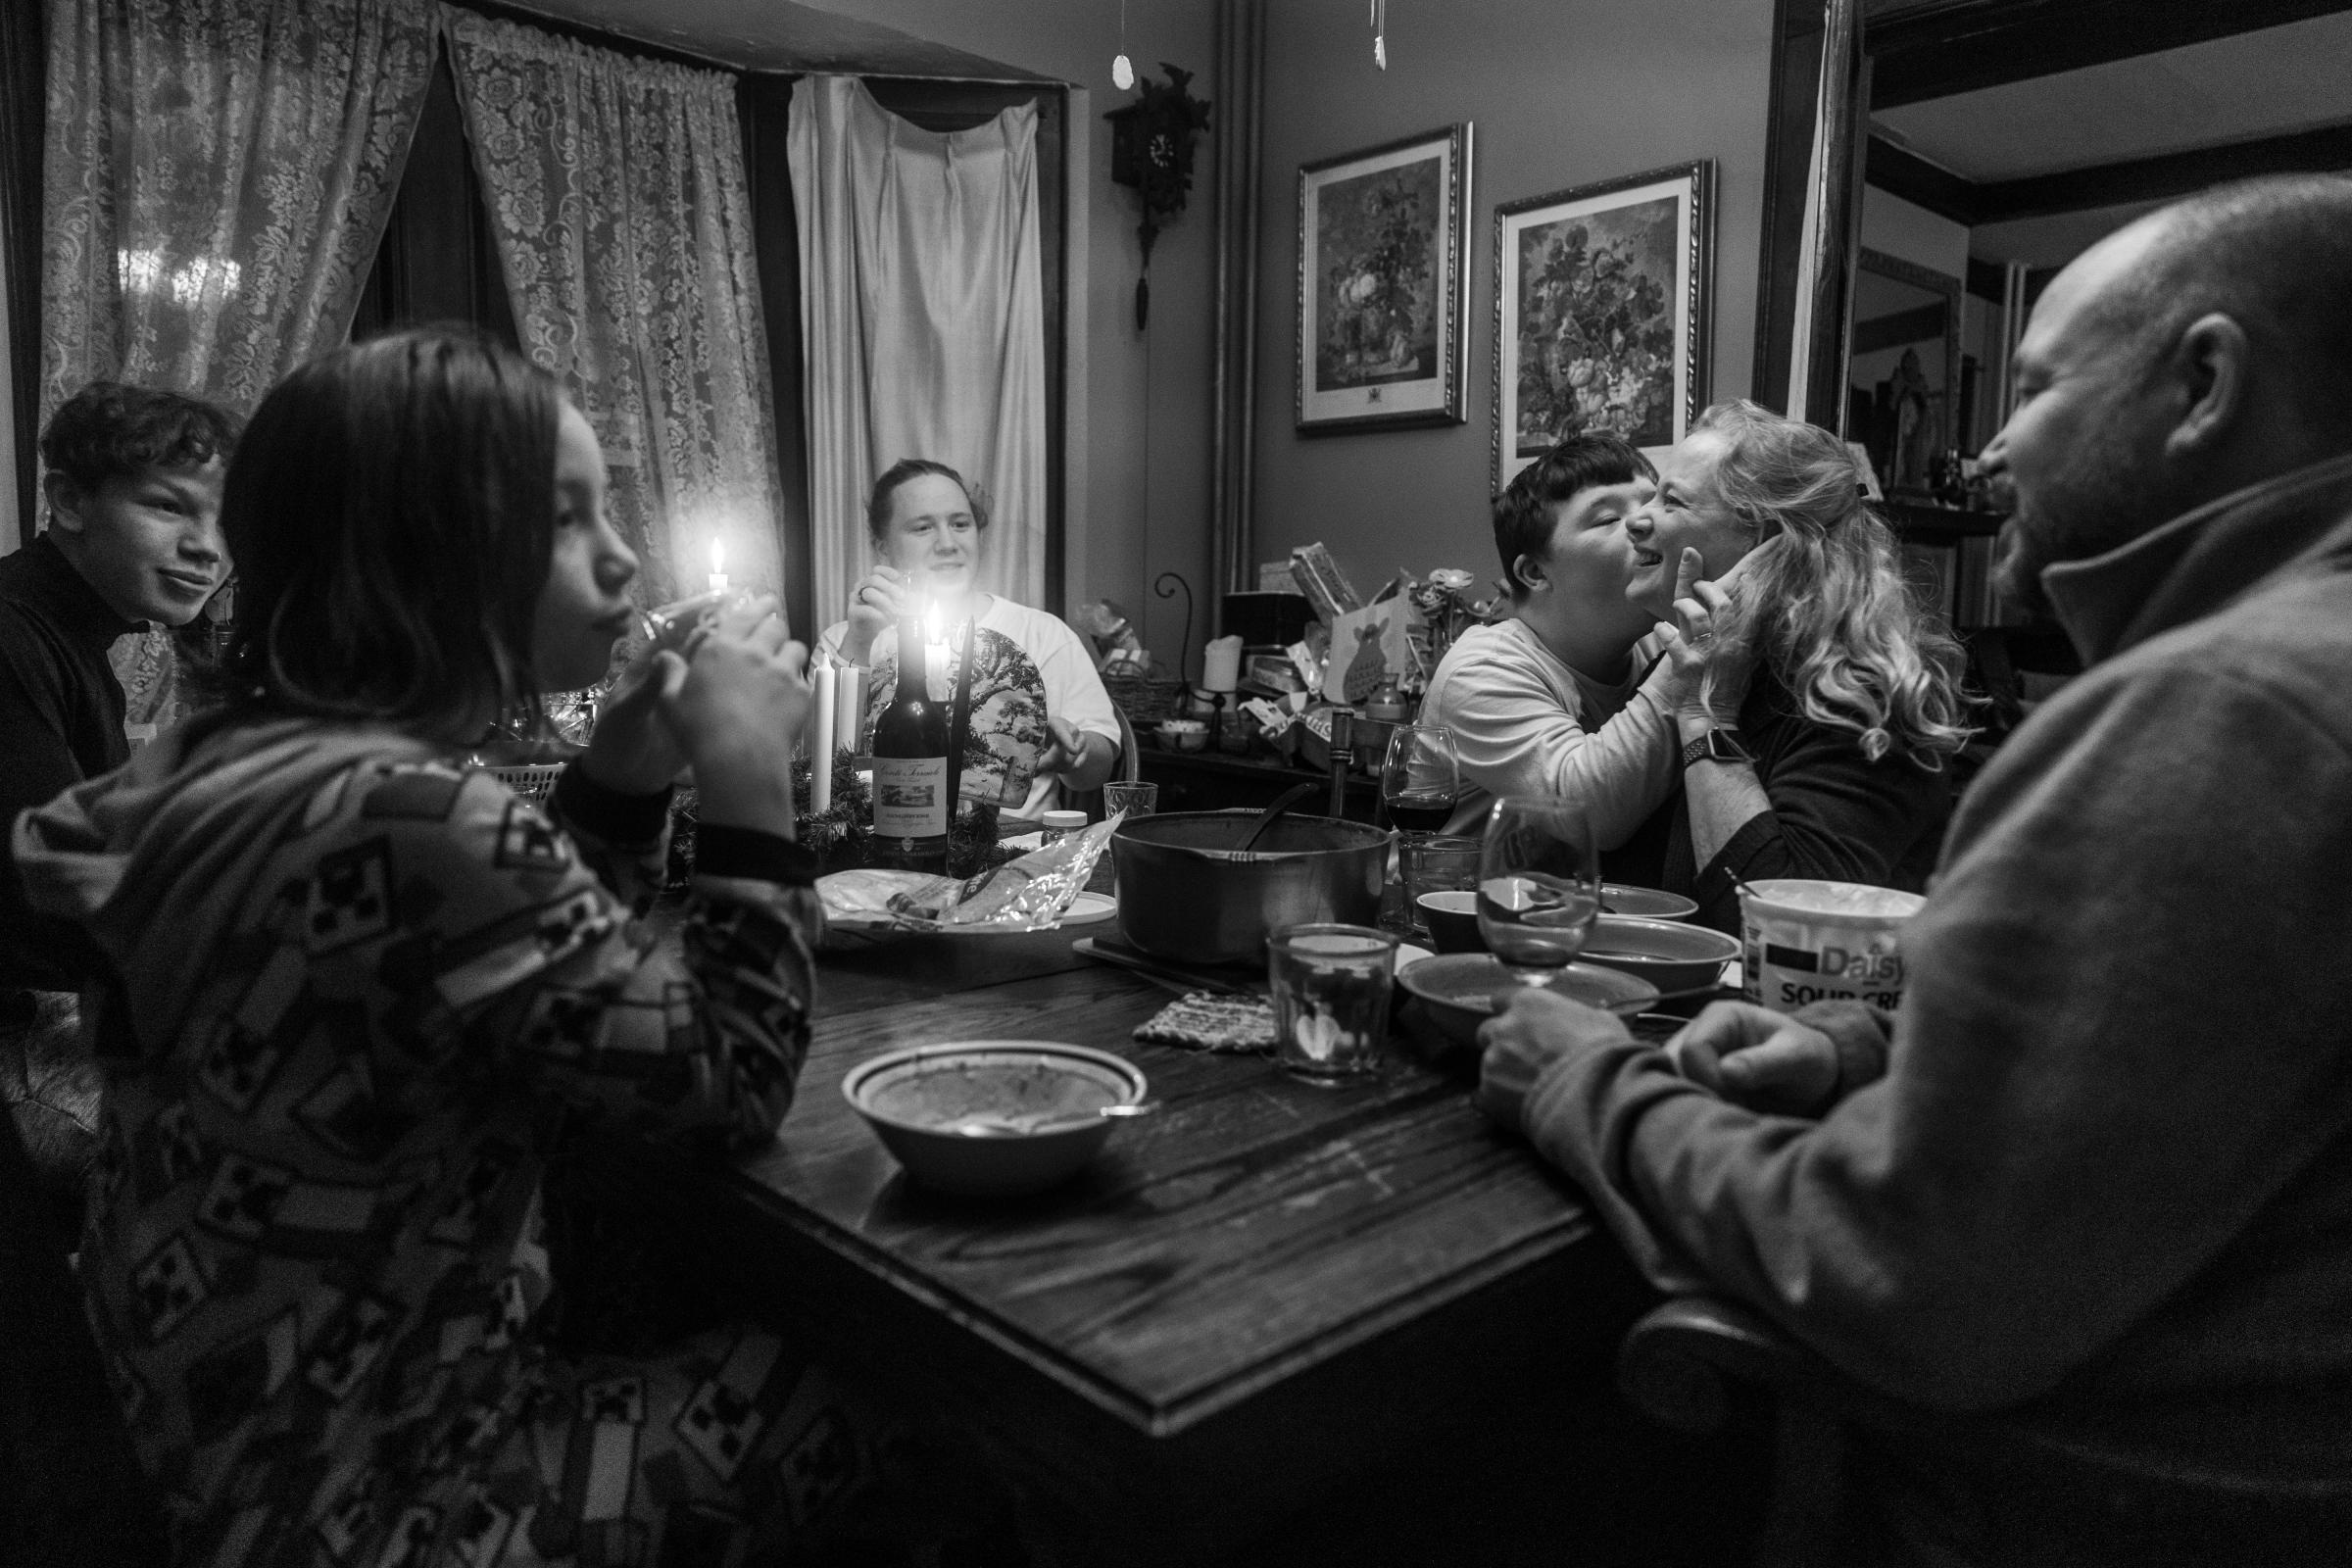 The Saufley family gathers for their daily dinner together around the table at their home in Syracuse, New York on November 30, 2021. The Saufley’s...